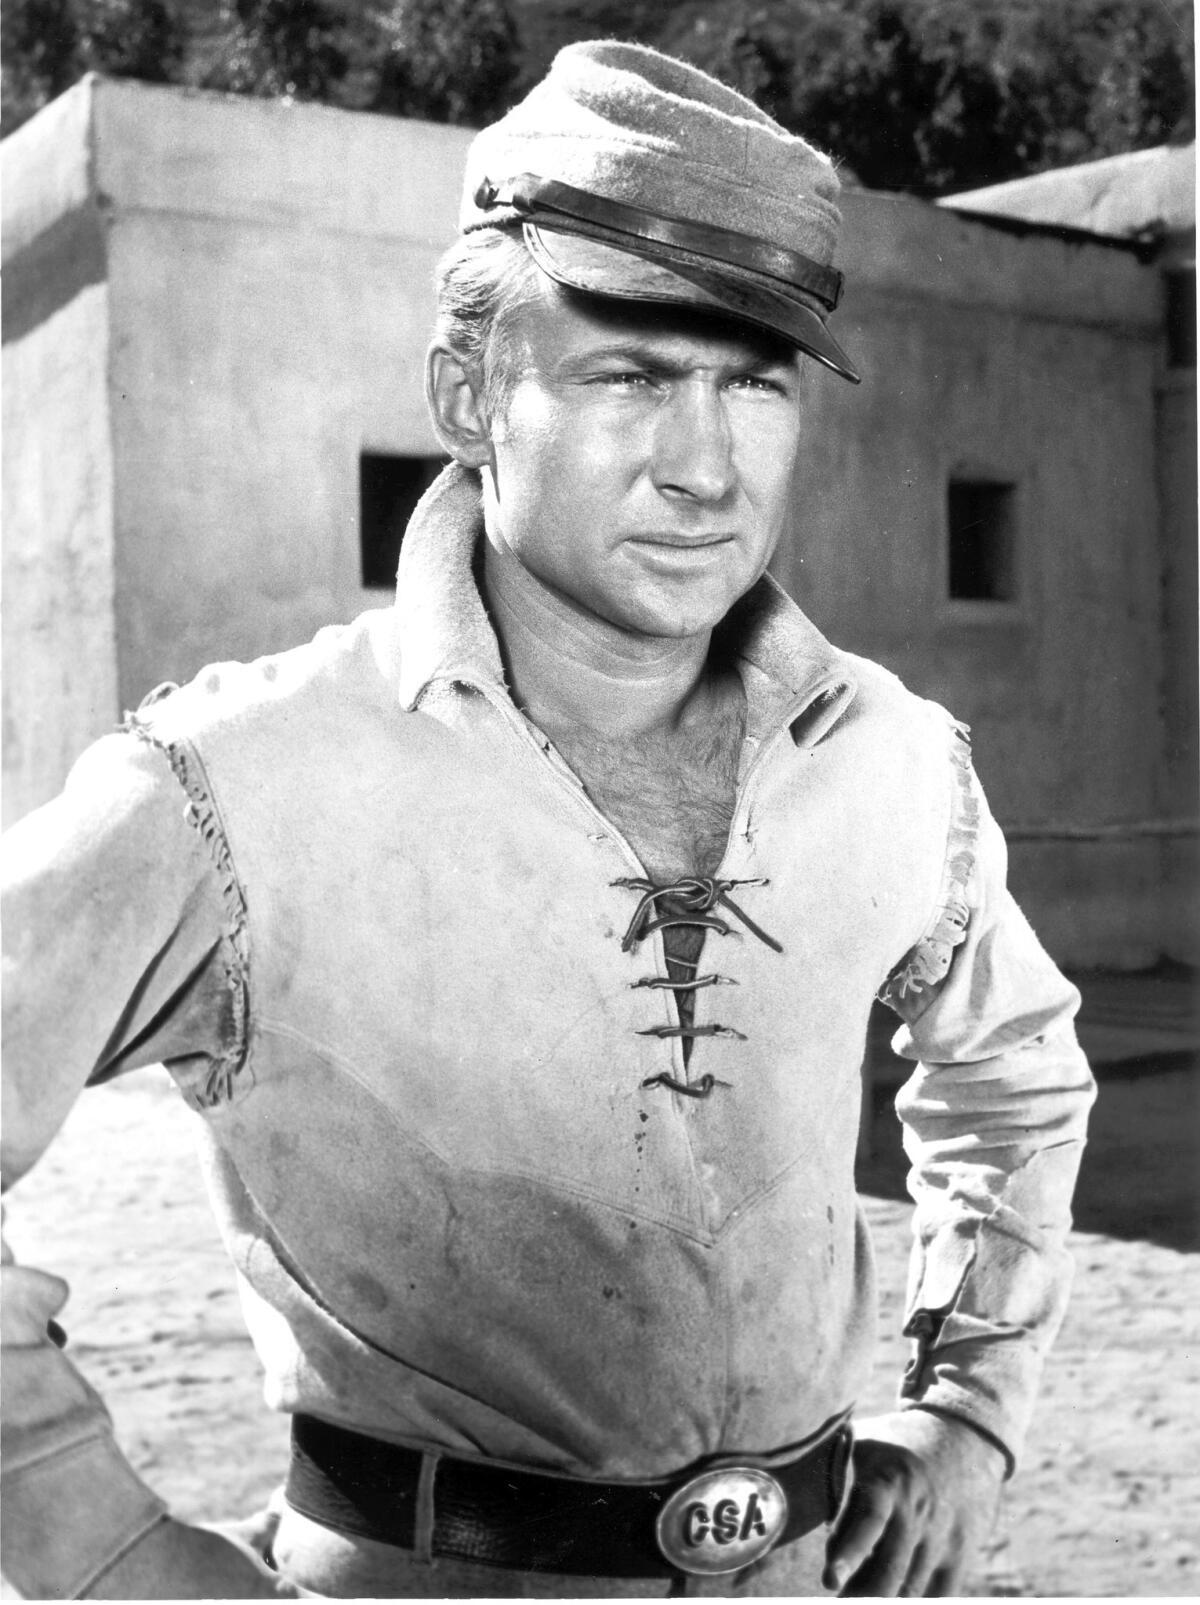 Nick Adams poses in costume as Johnny Yuma from the television series "The Rebel" in 1959.